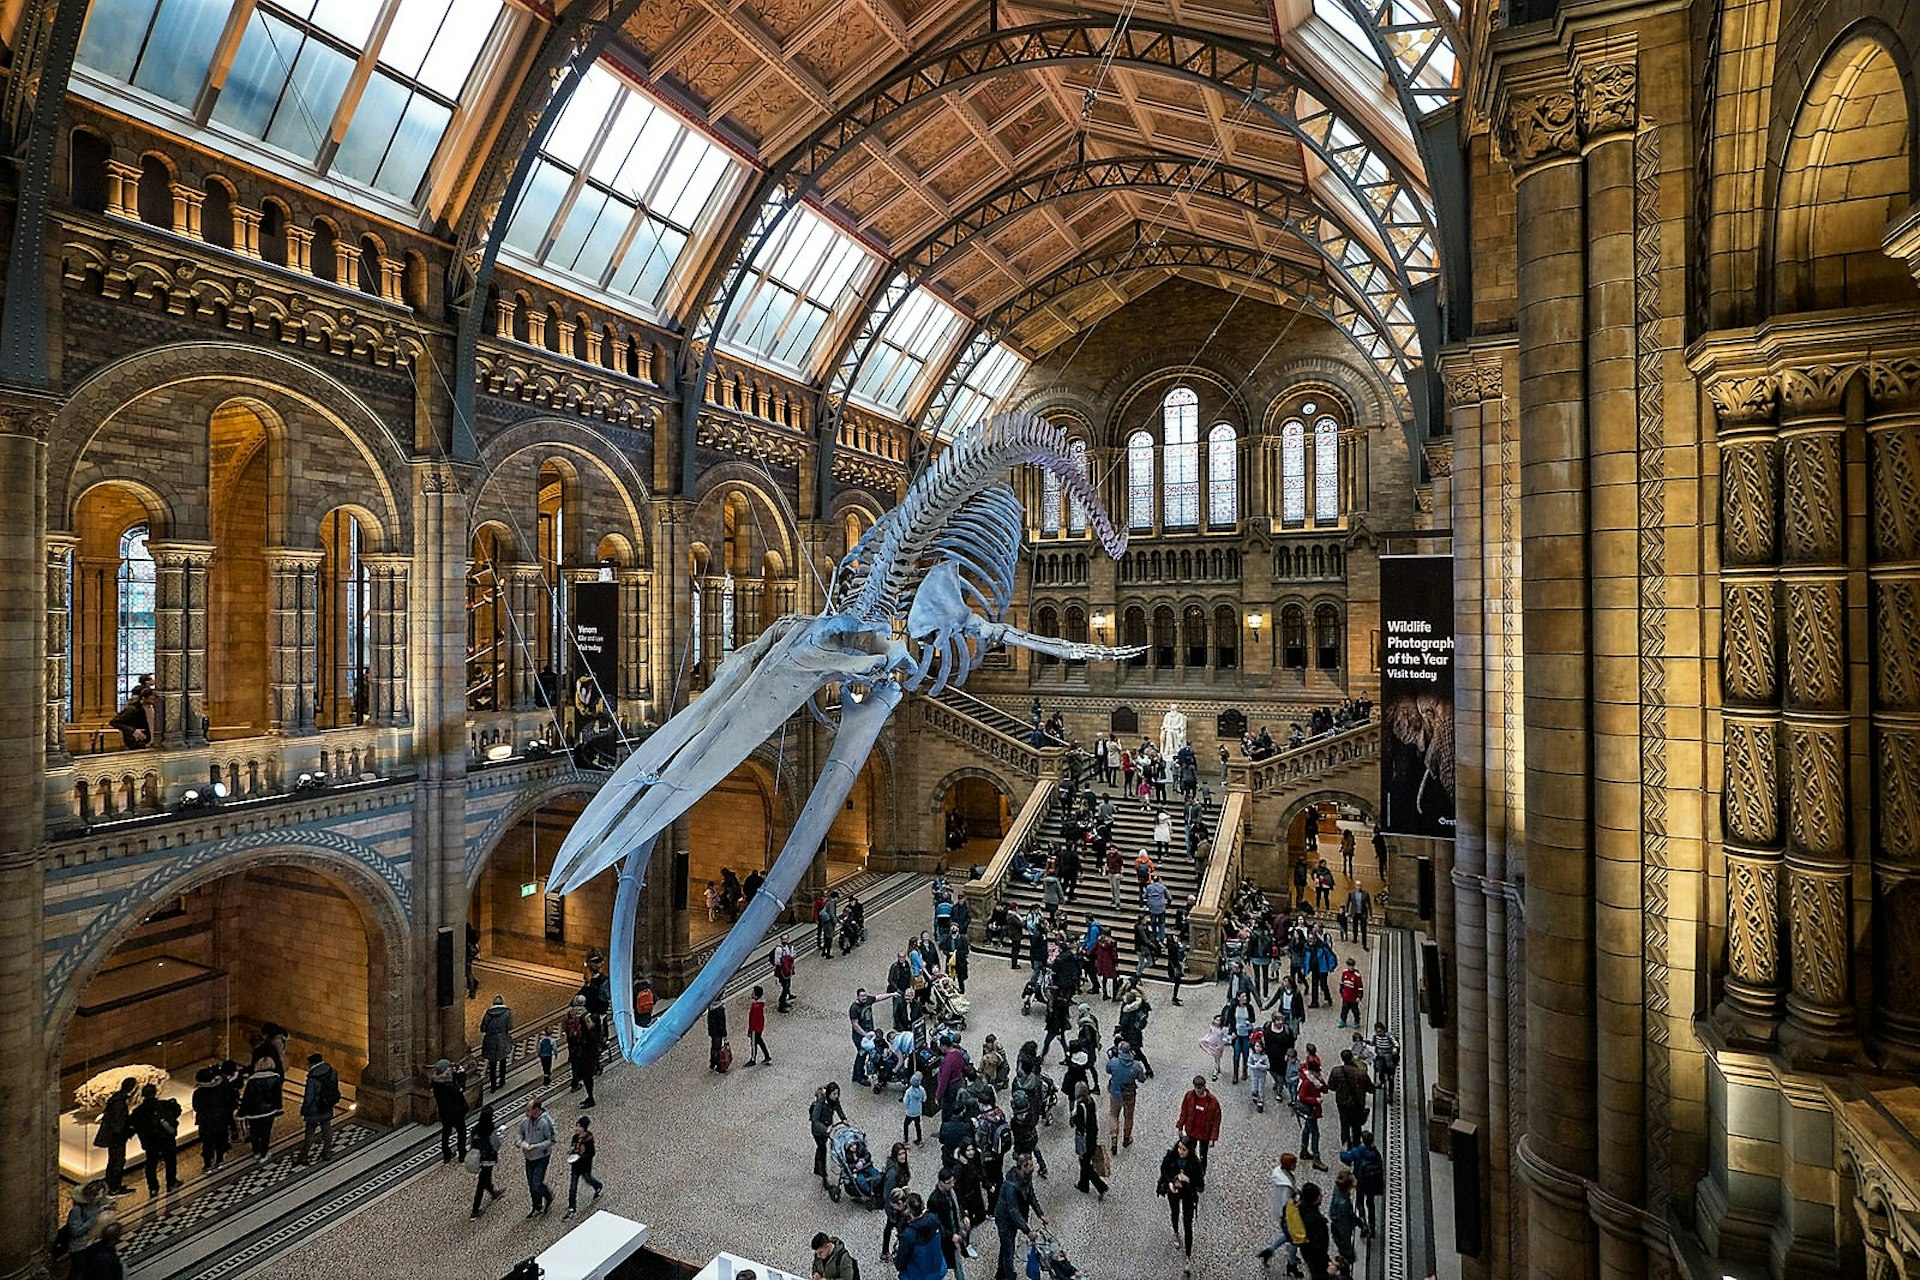 The entrance hall in London's Natural History Museum with the skeleton of a huge blue whale suspended from the ceiling. Visitors walk around underneath the skeleton and along the balconies around it. The room is warmly lit. 